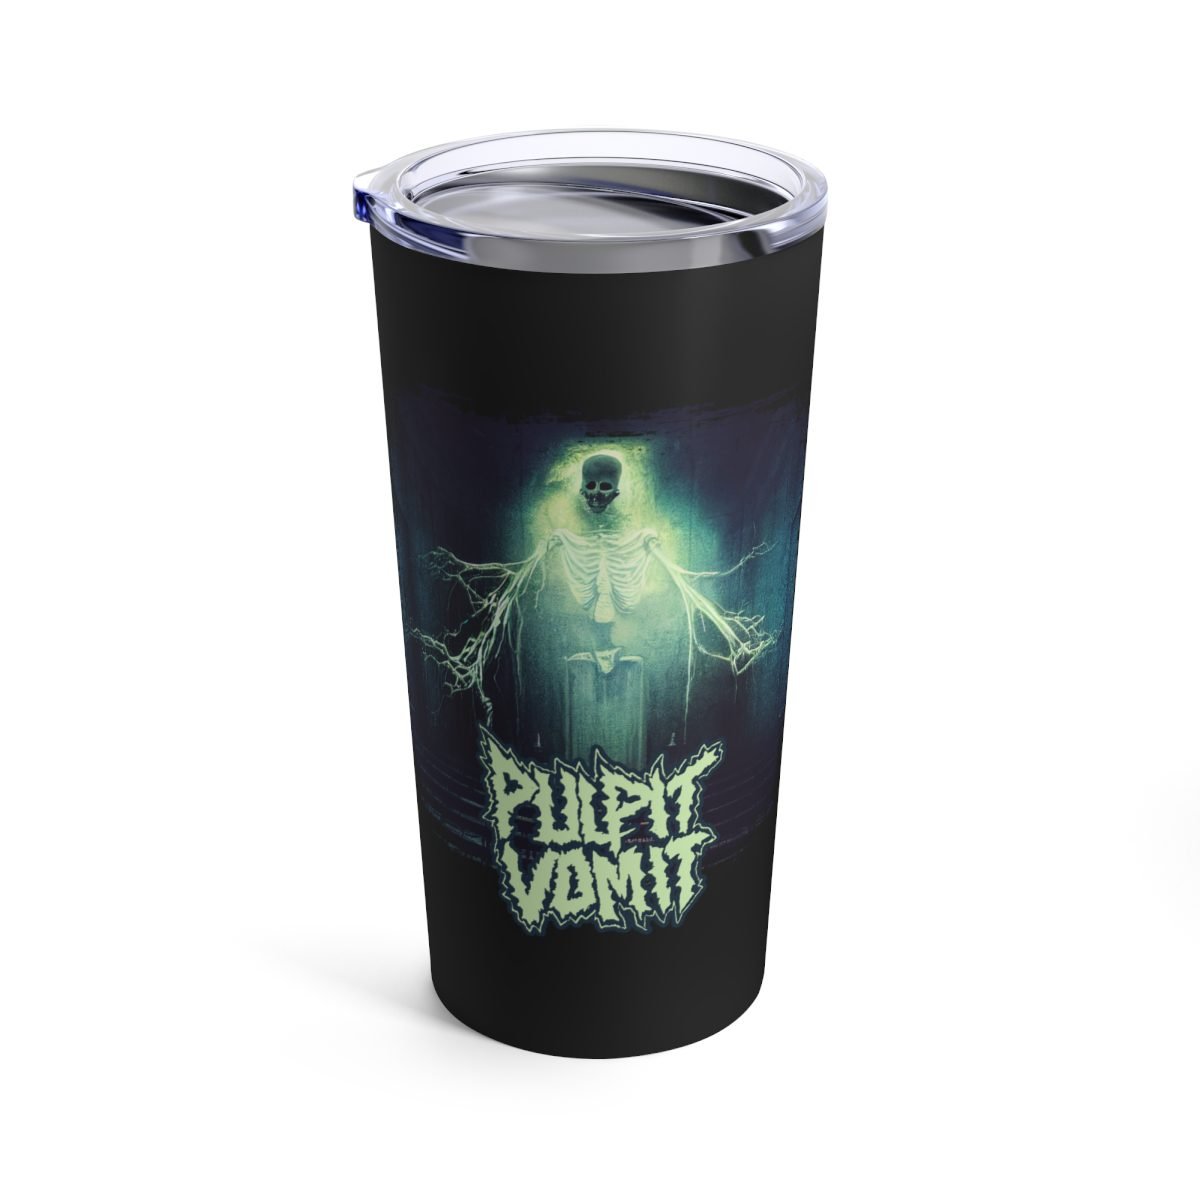 Pulpit Vomit (The Charon Collective) 20oz Stainless Steel Tumbler